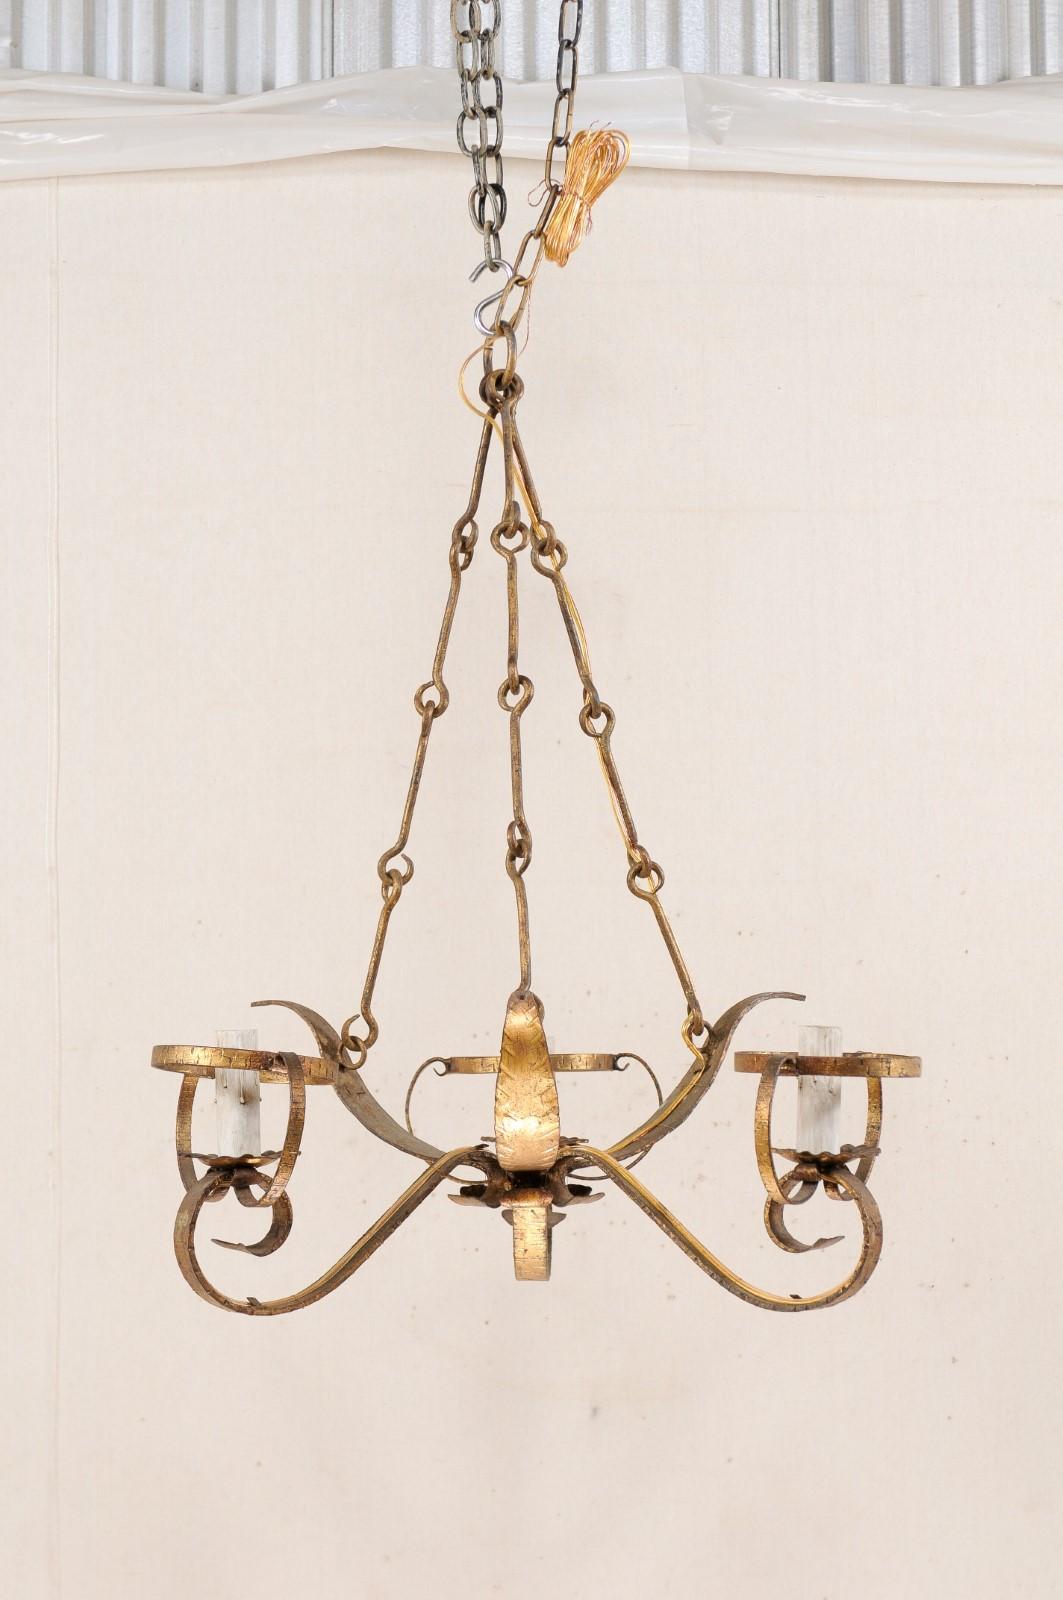 A French three-light chandelier from the mid-20th century. This vintage hanging light from France features three scrolled light arms which are divided by a beautiful splay of three iron leaves between them, creating a small circular center, giving